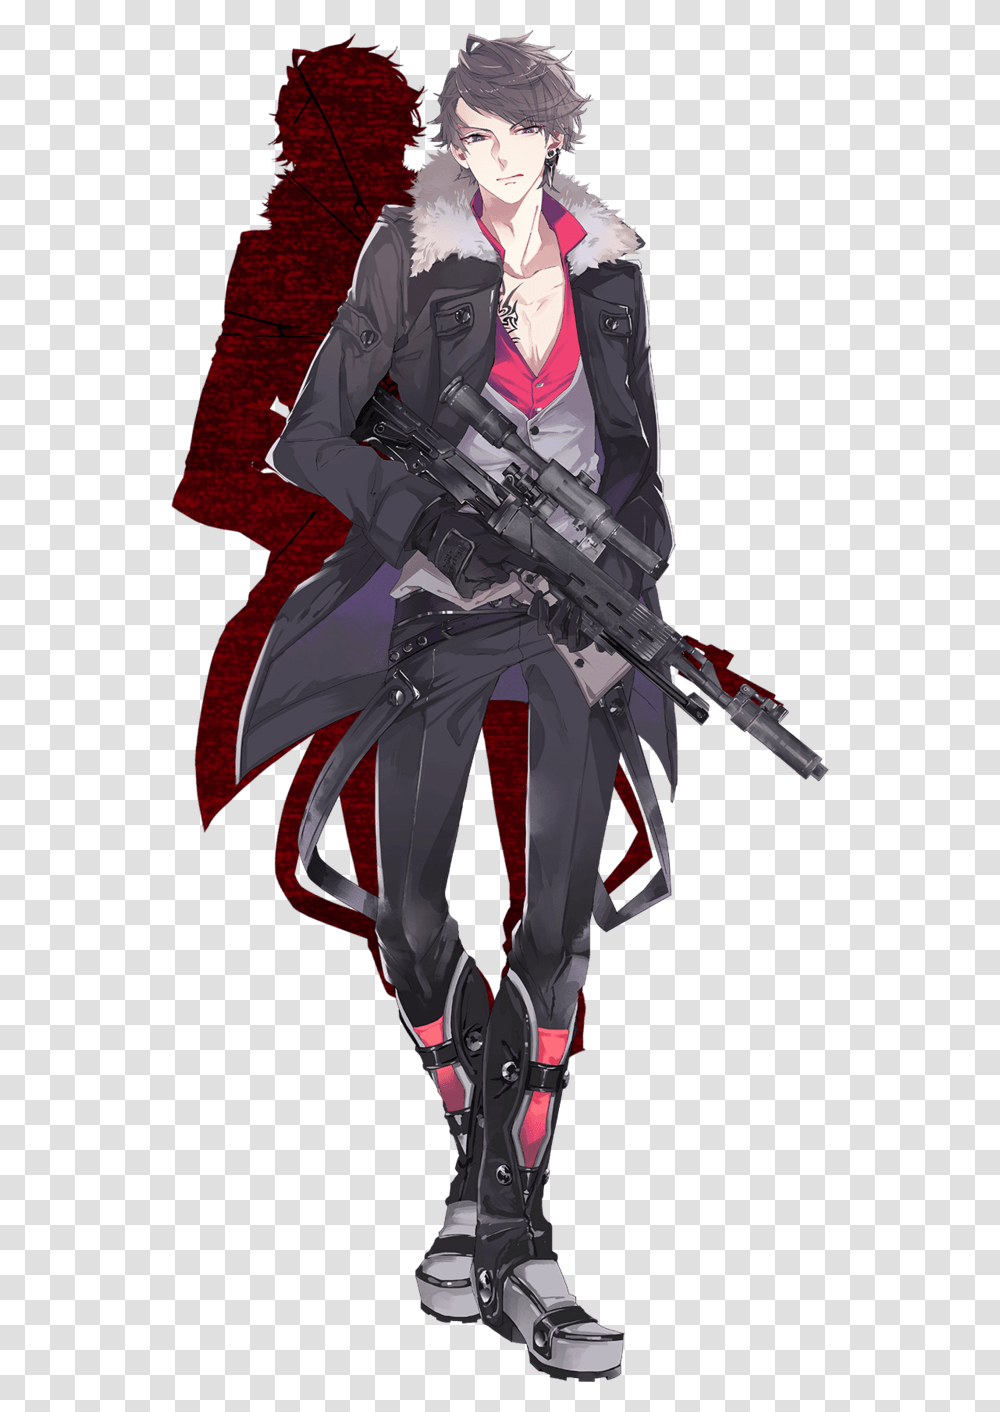 Anime Guy Holding A Gun Anime Boy With Rifle, Person, Ninja, Suit Transparent Png